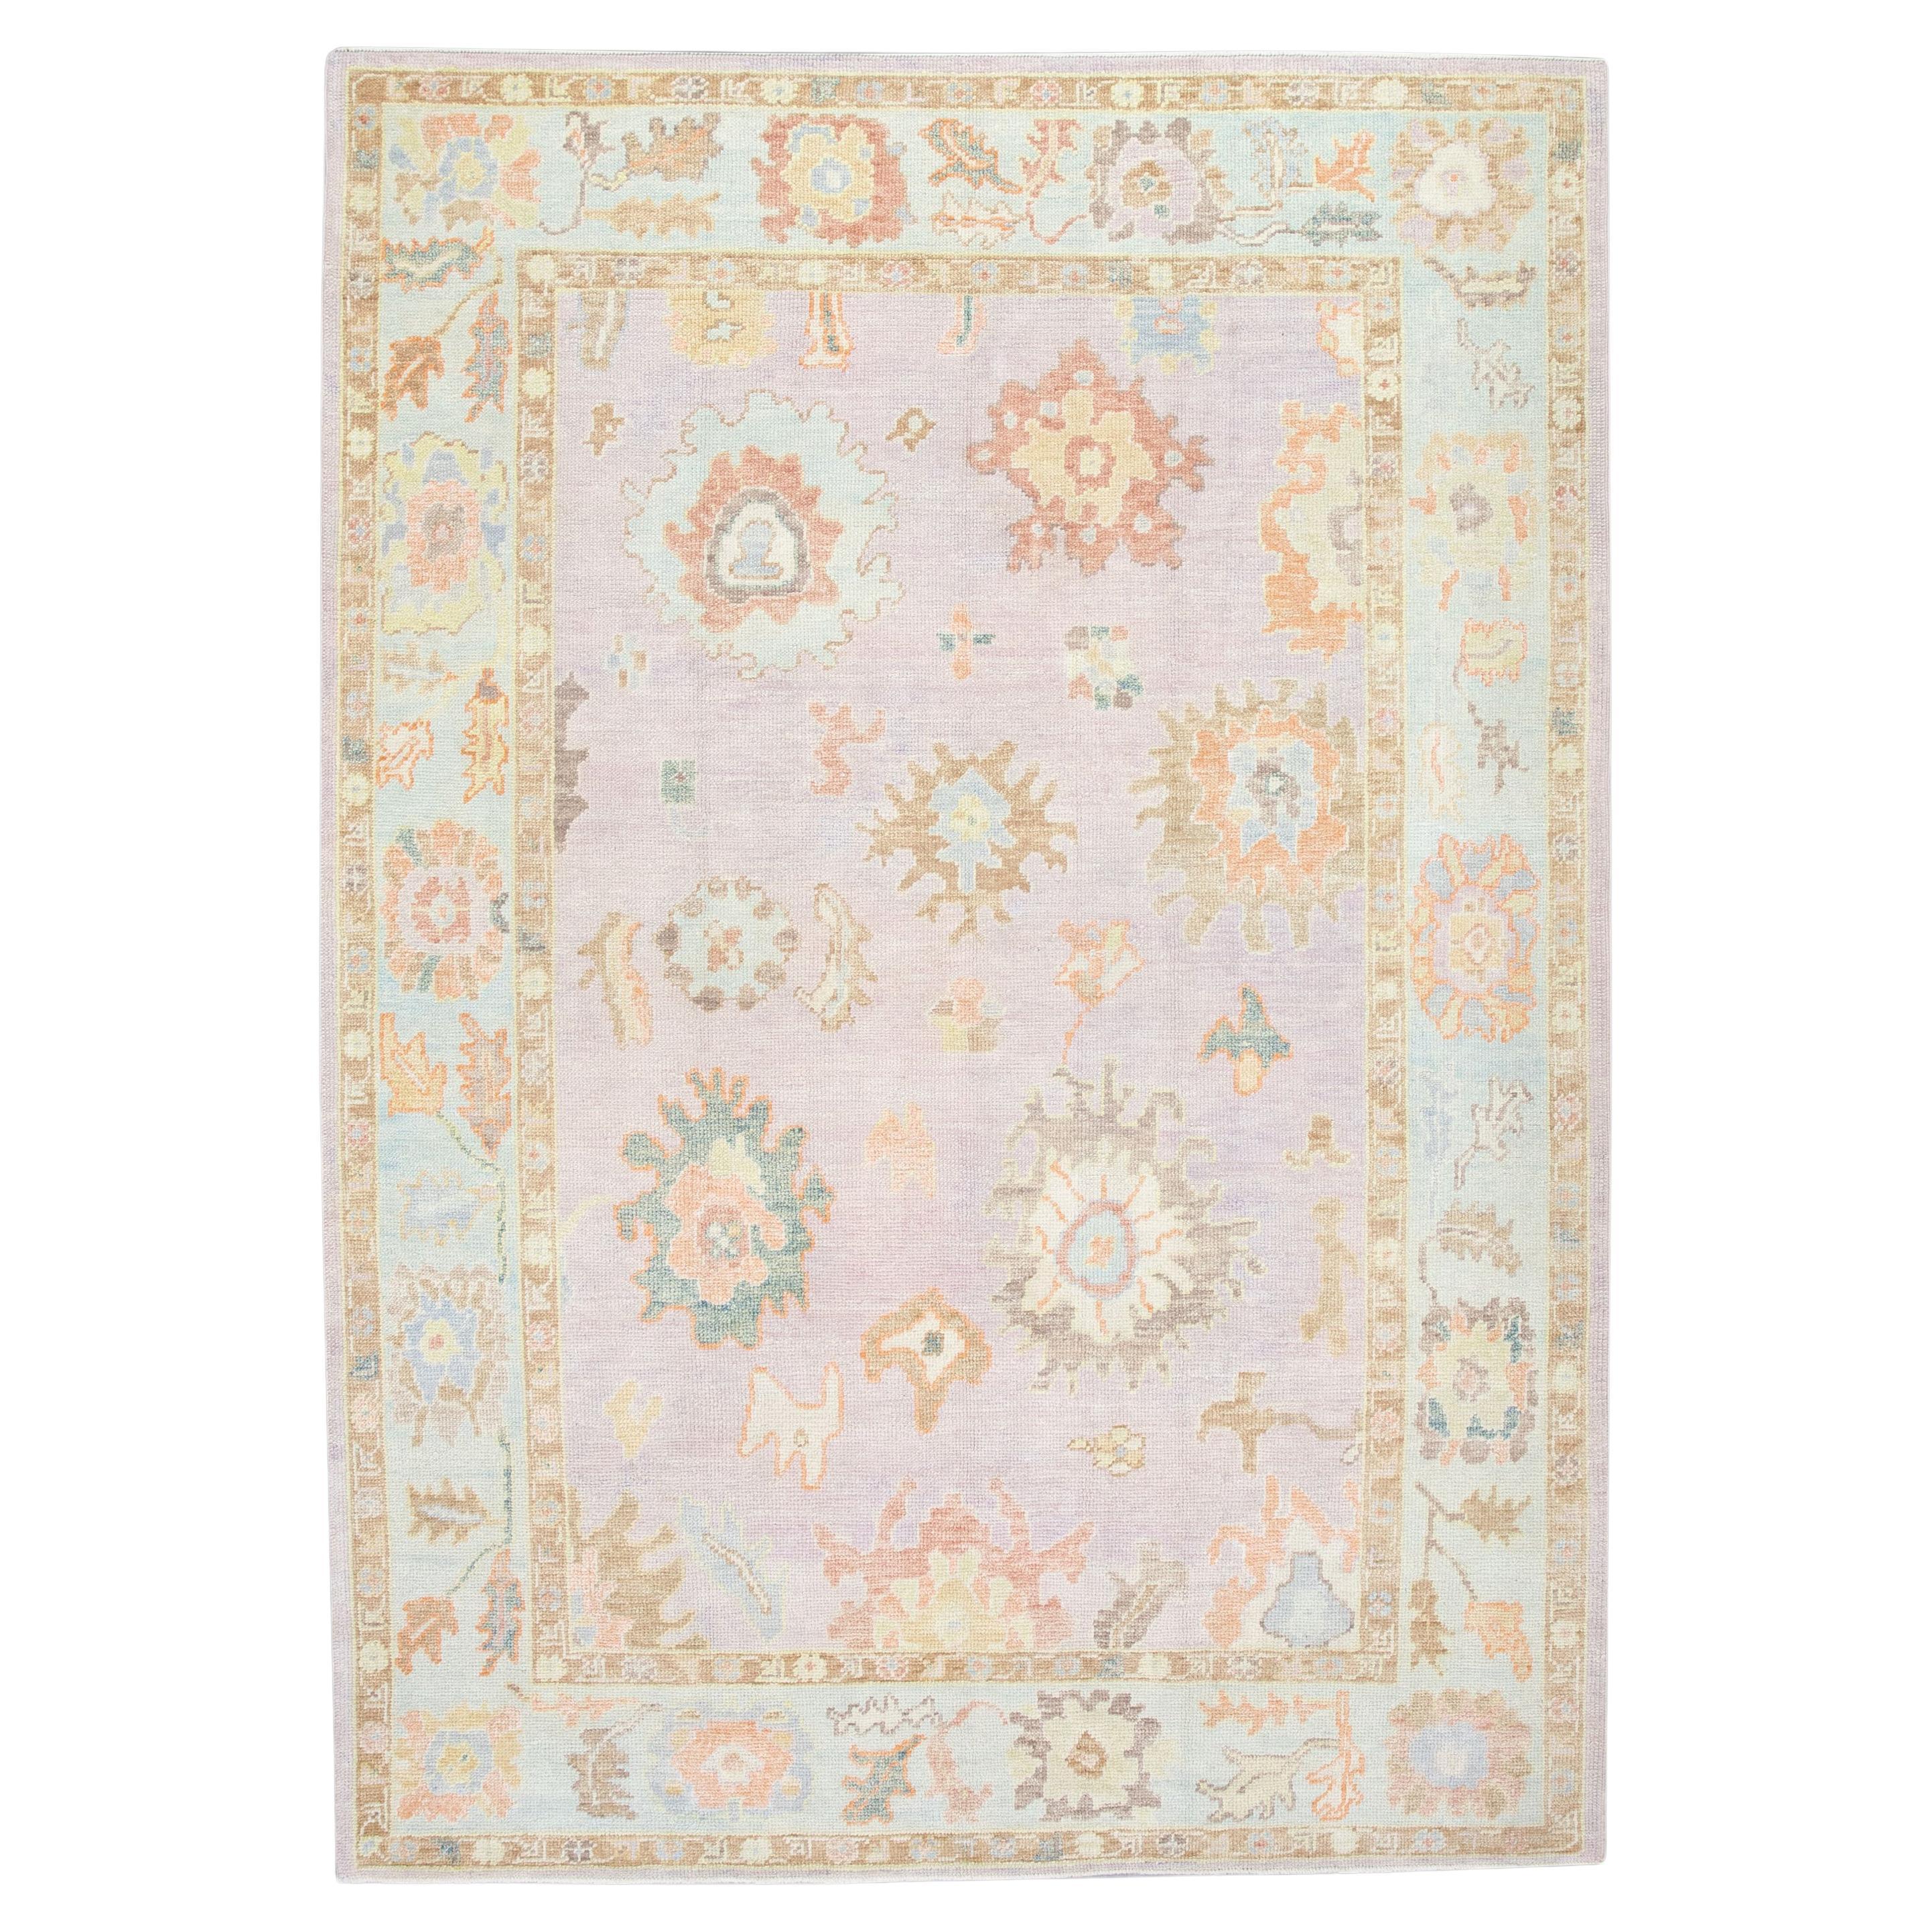 Pink and Blue Floral Design Handwoven Wool Turkish Oushak Rug 6'2" x 8'10"